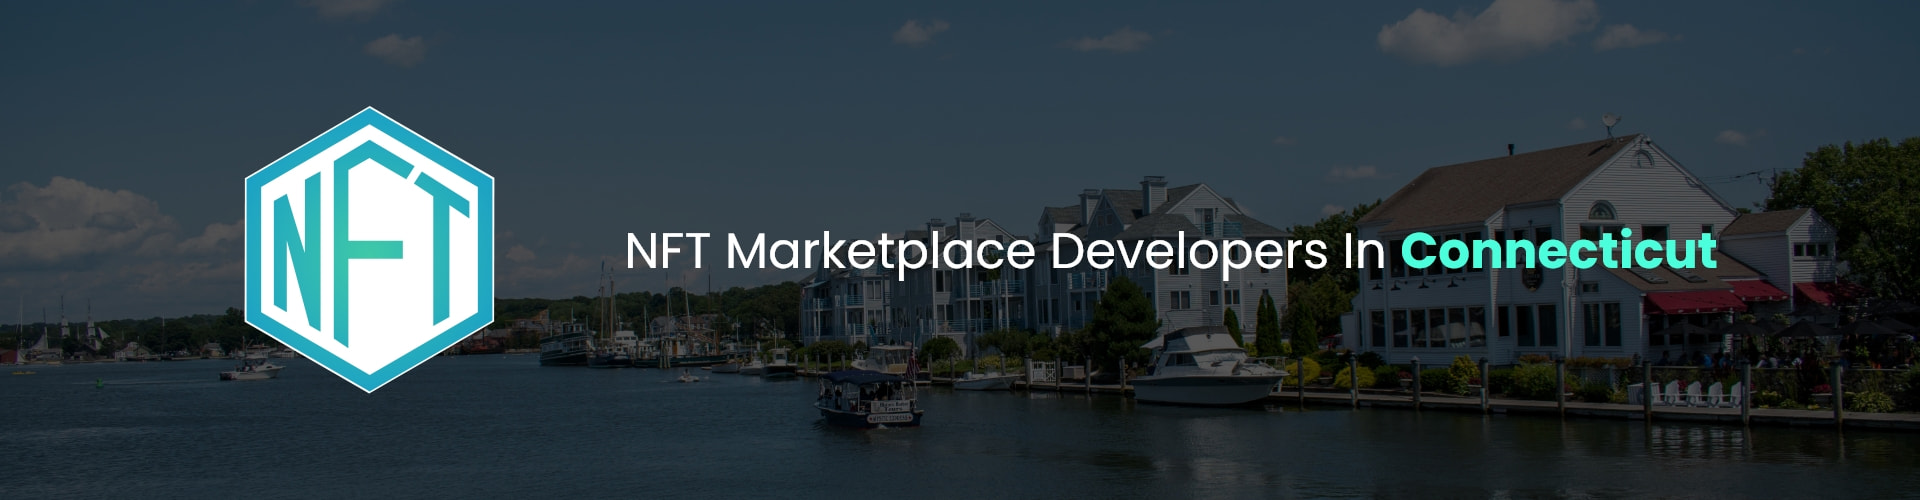 hire nft marketplace developers in connecticut